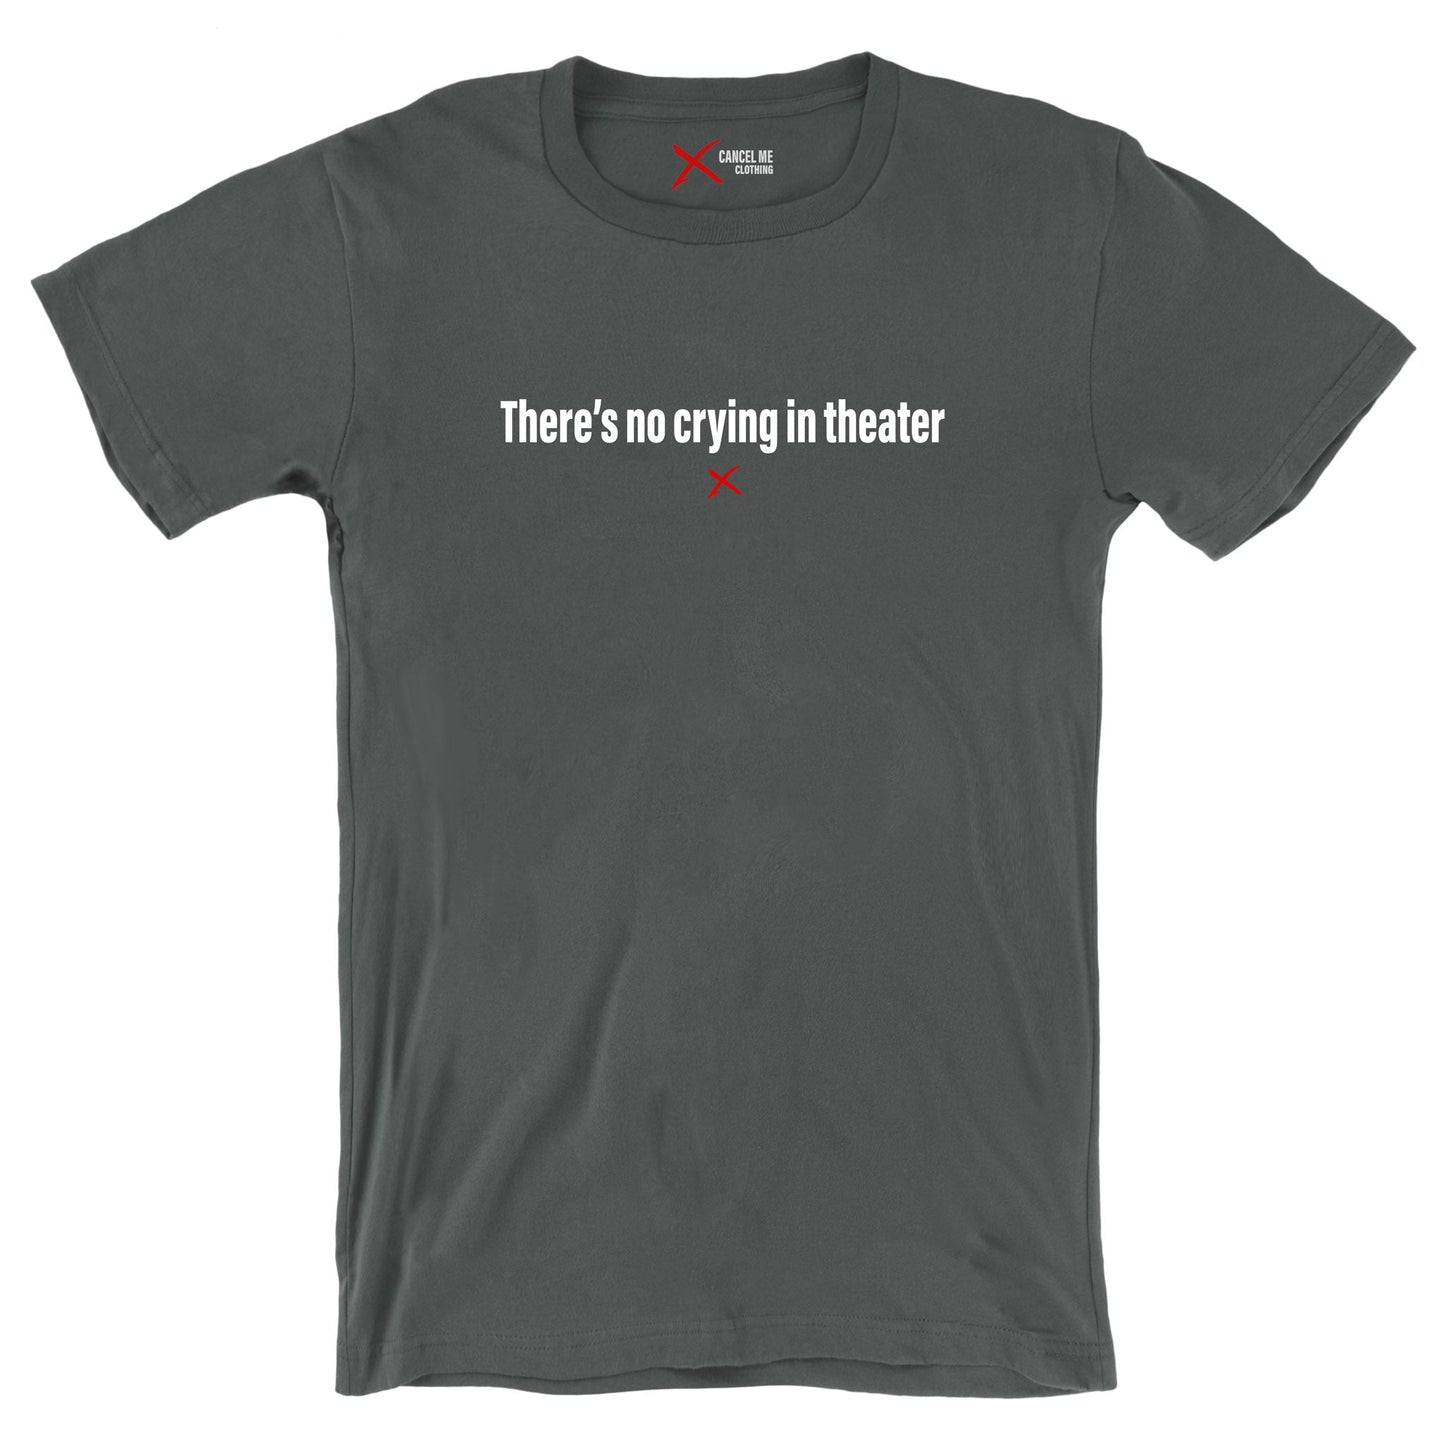 There's no crying in theater - Shirt